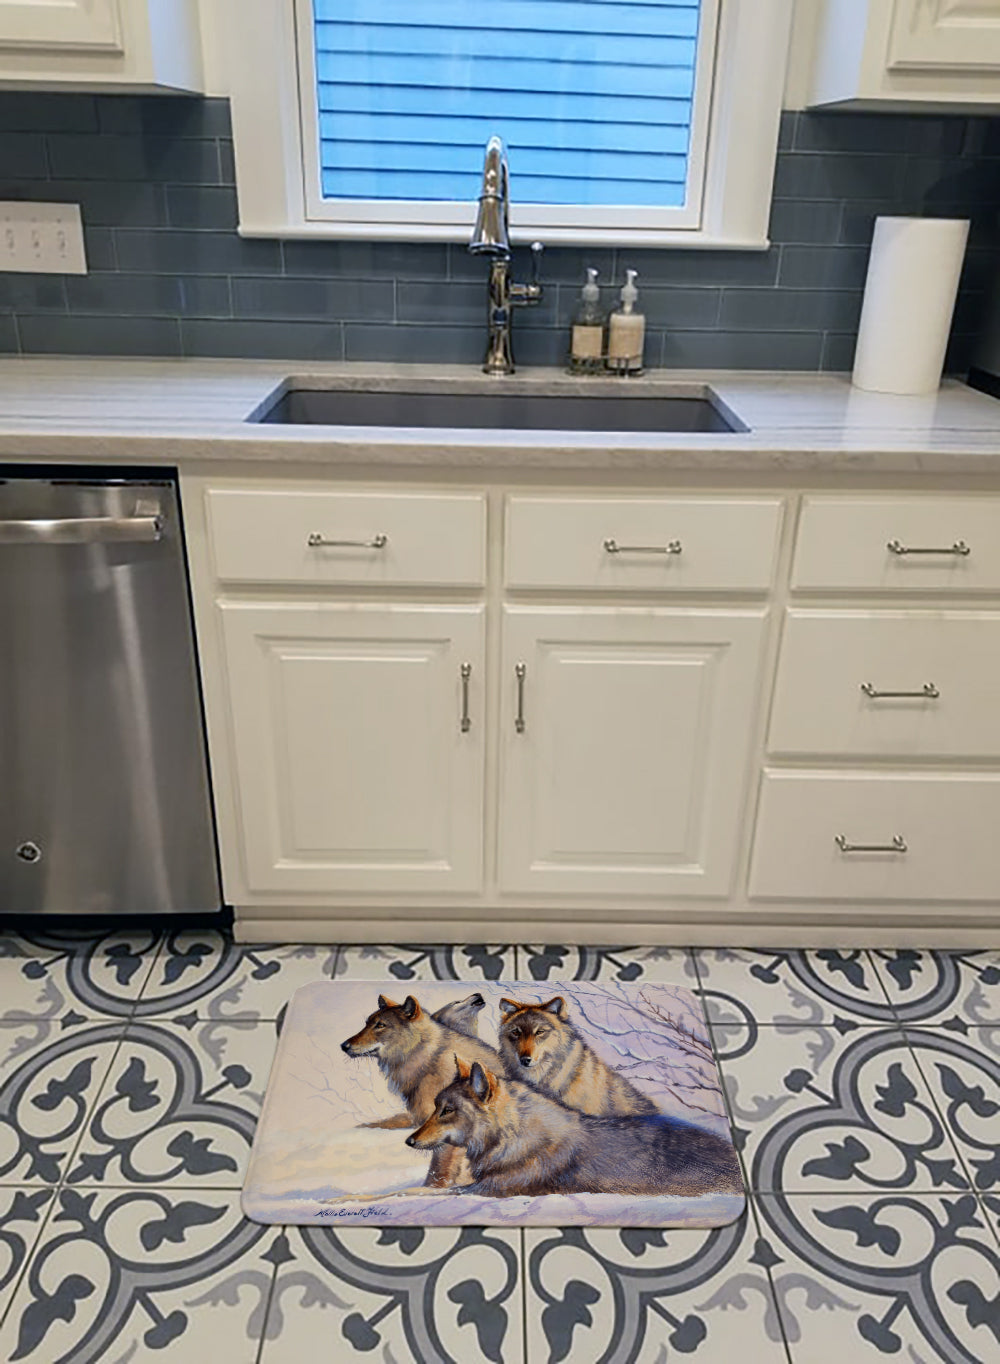 Wolves by Mollie Field Machine Washable Memory Foam Mat FMF0007RUG - the-store.com